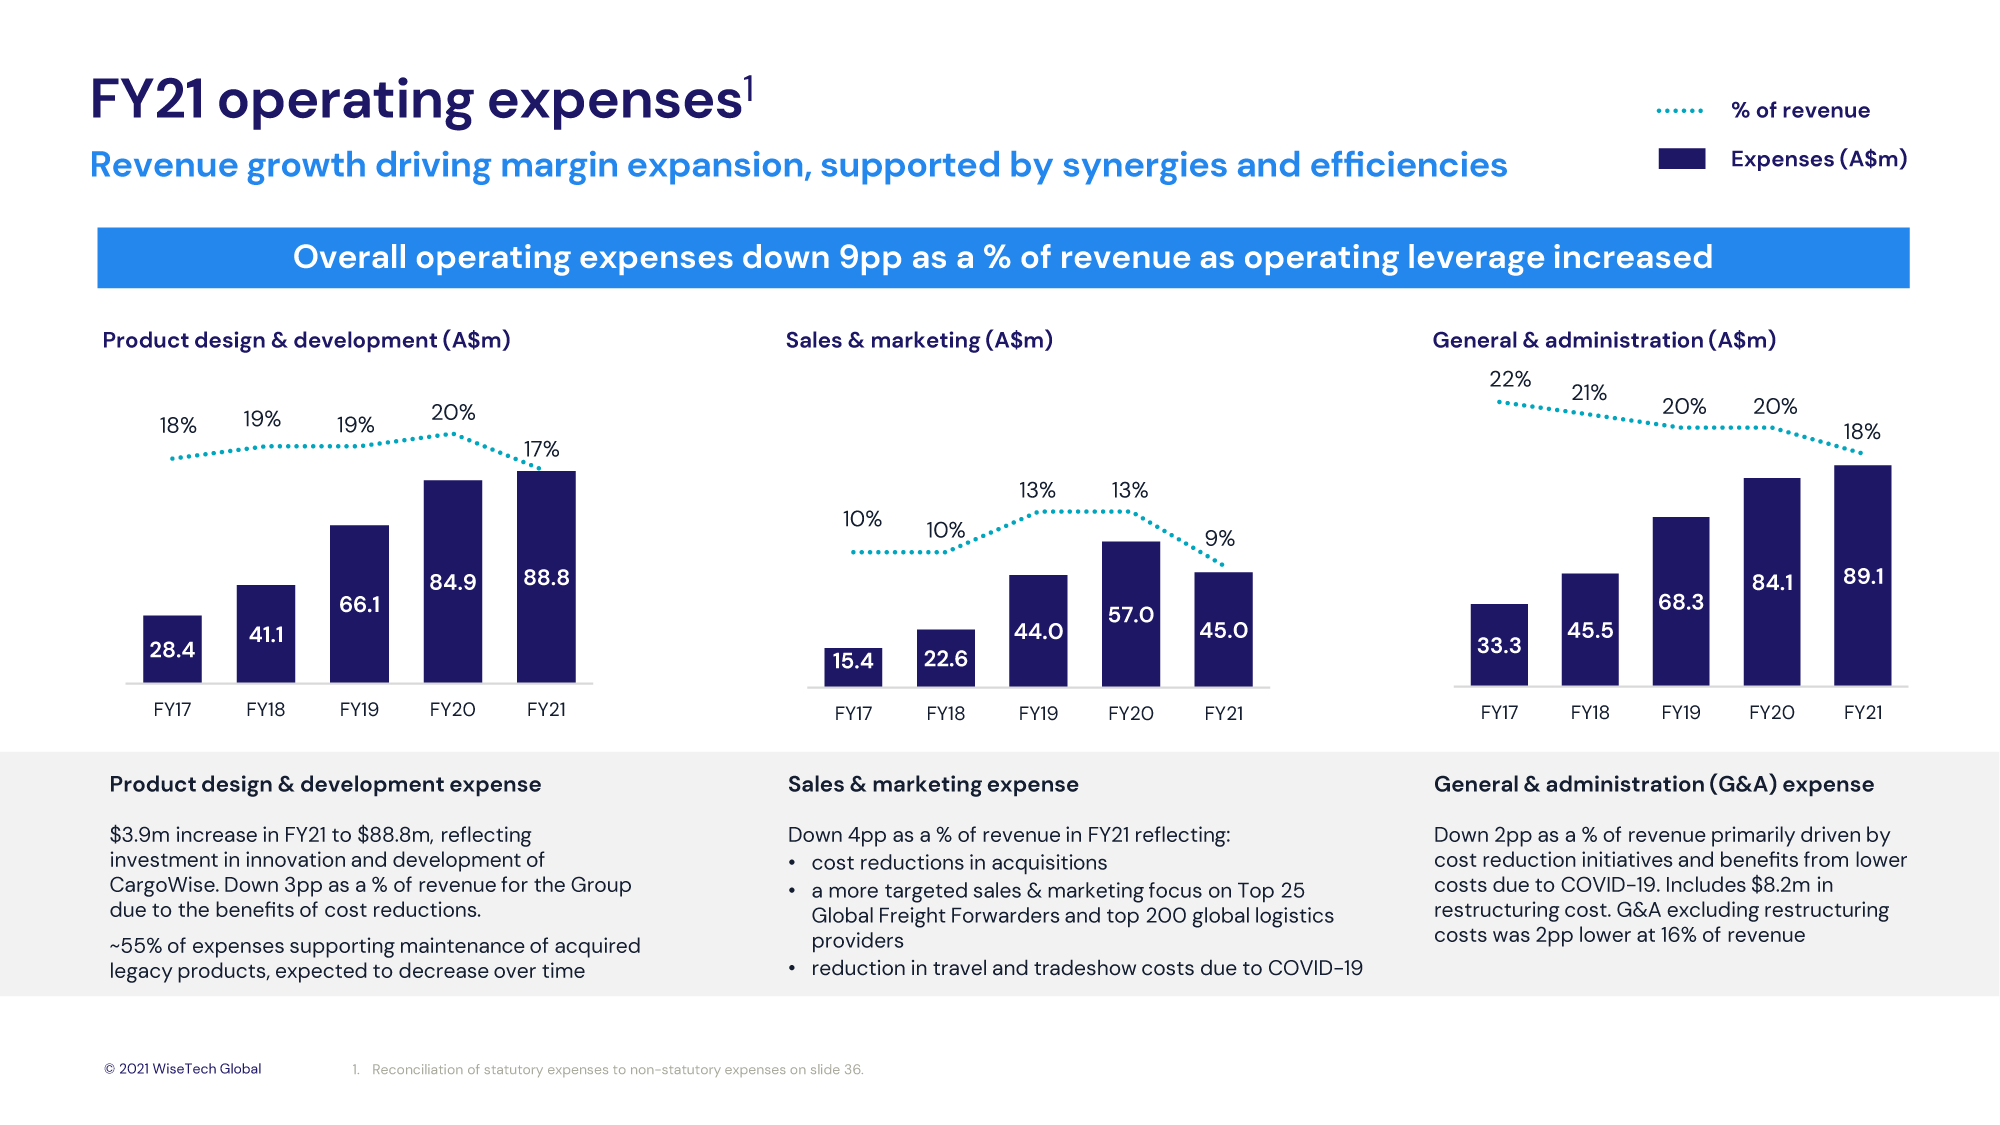 FY21 operating expenses